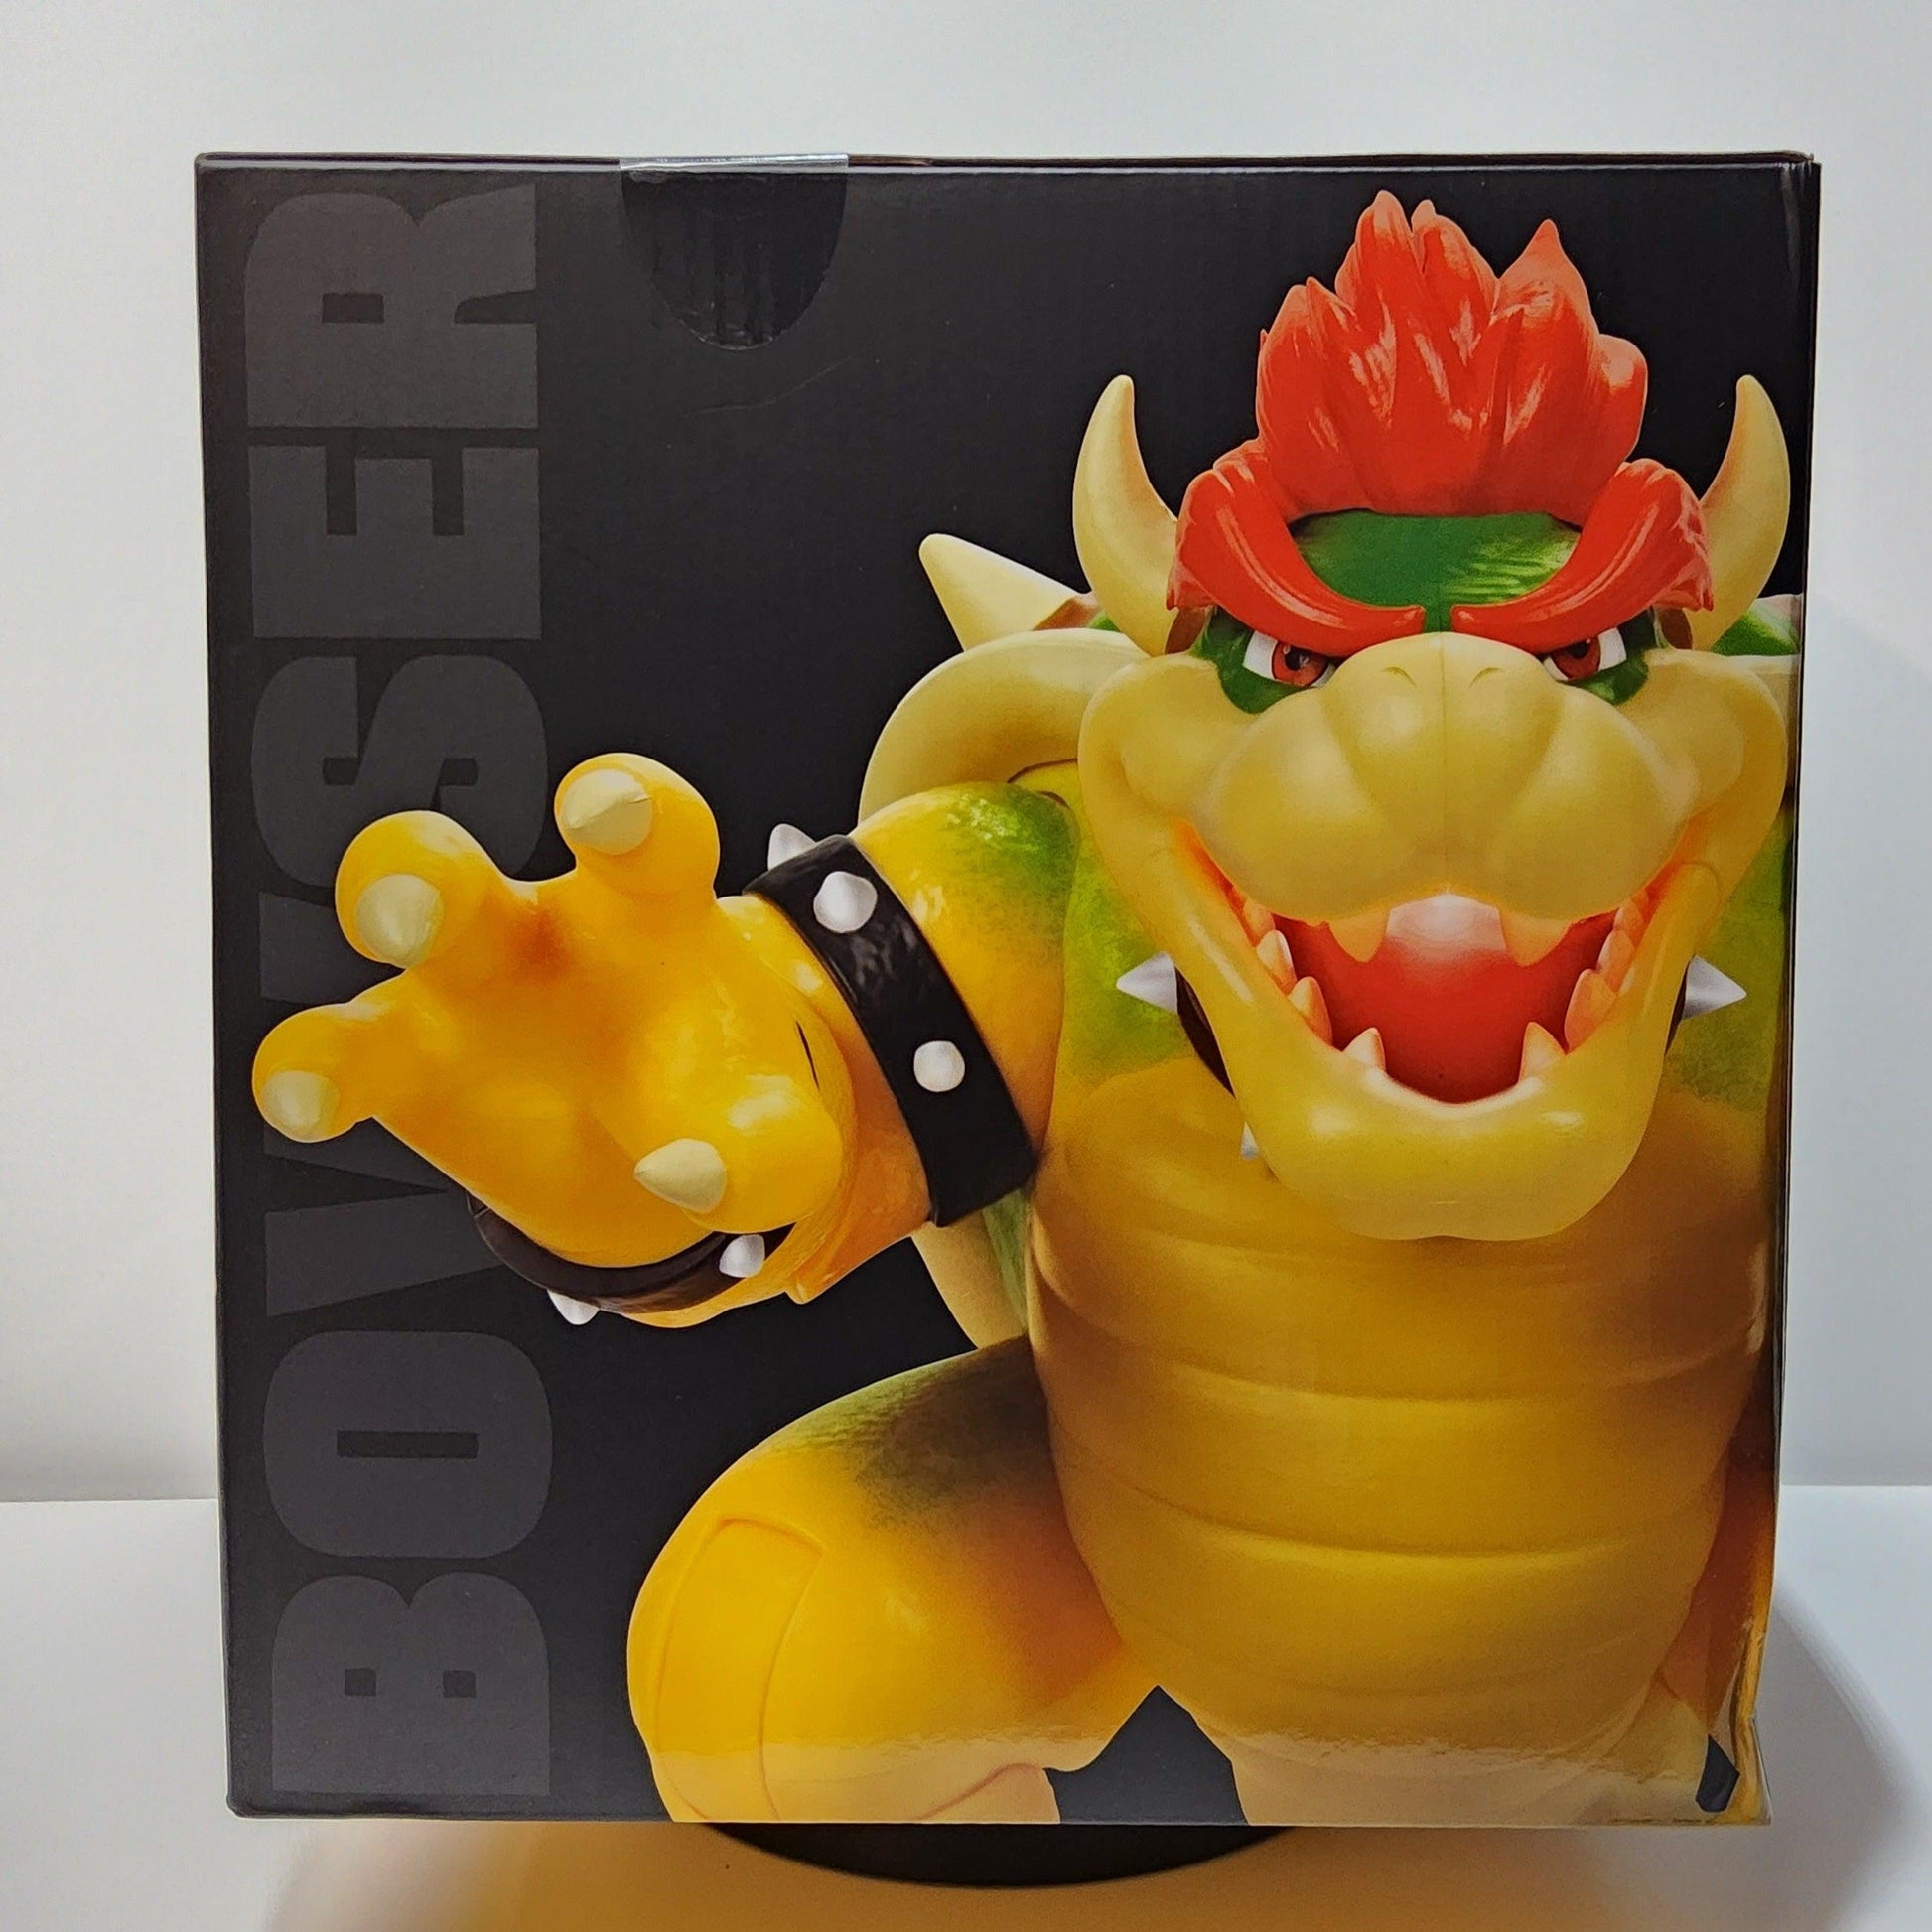  The Super Mario Bros. Movie 7-Inch Feature Bowser Action Figure  with Fire Breathing Effects : Toys & Games